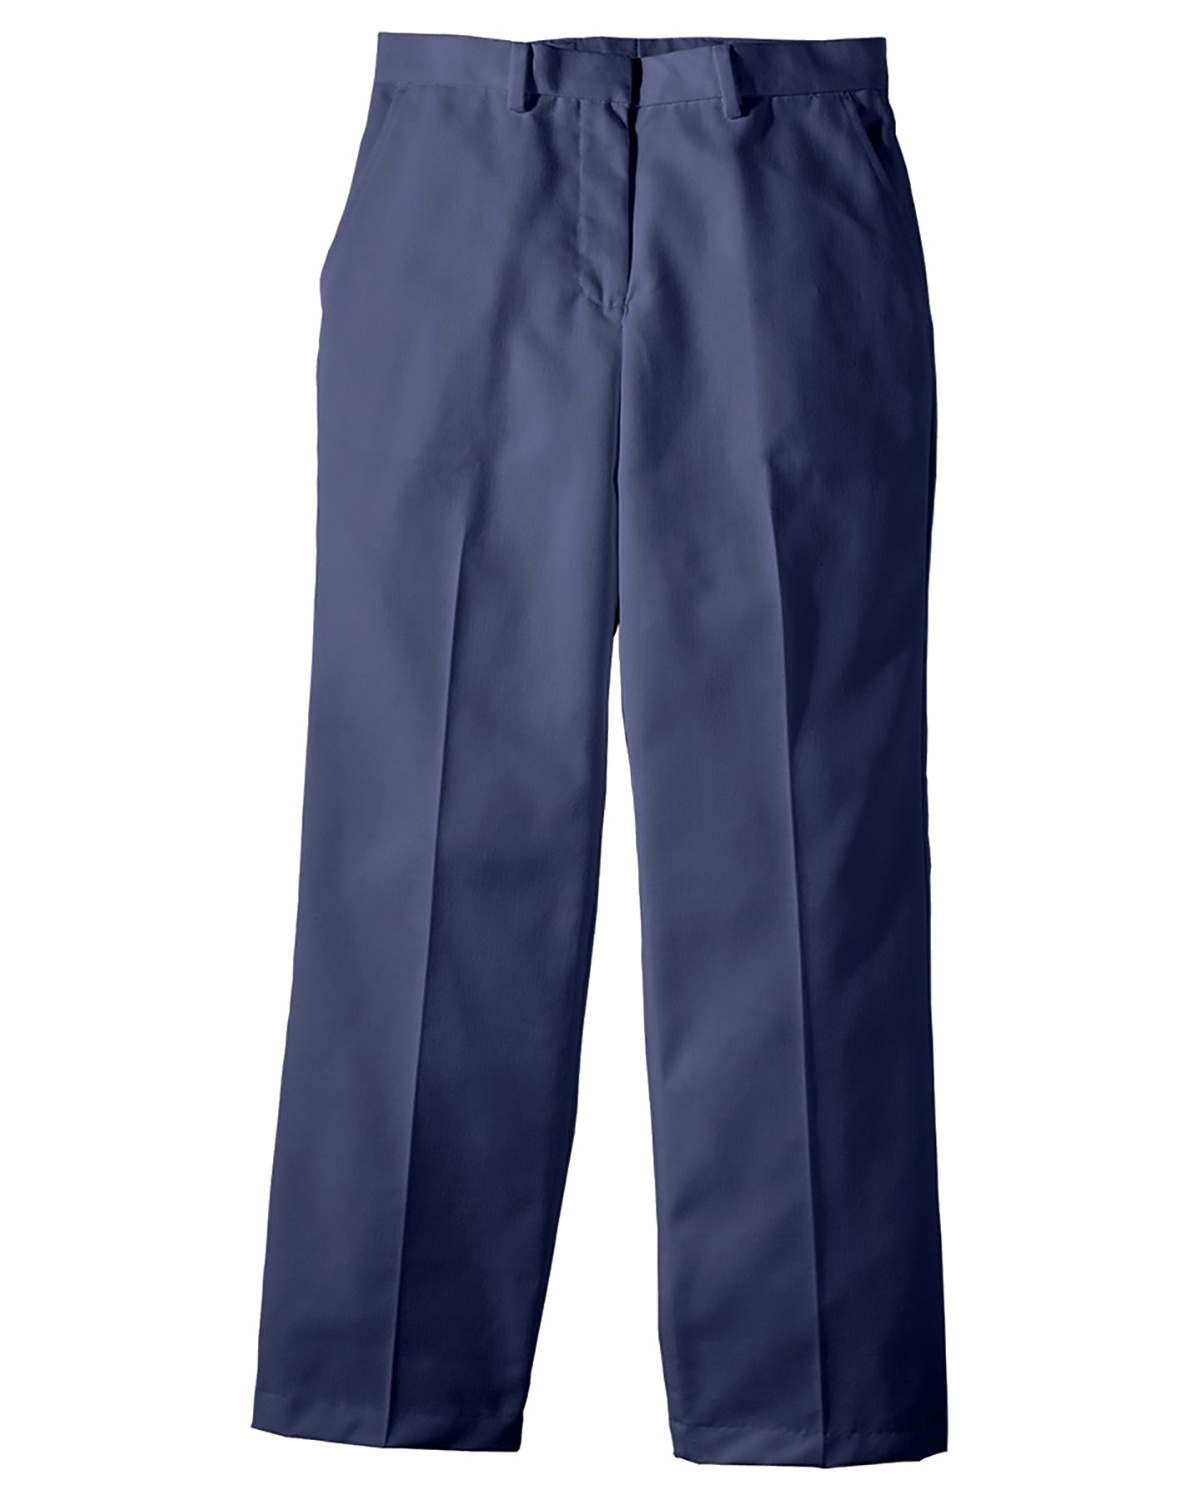 Ladies' Business Casual Flat-Front Chino Pants, Edwards Garment